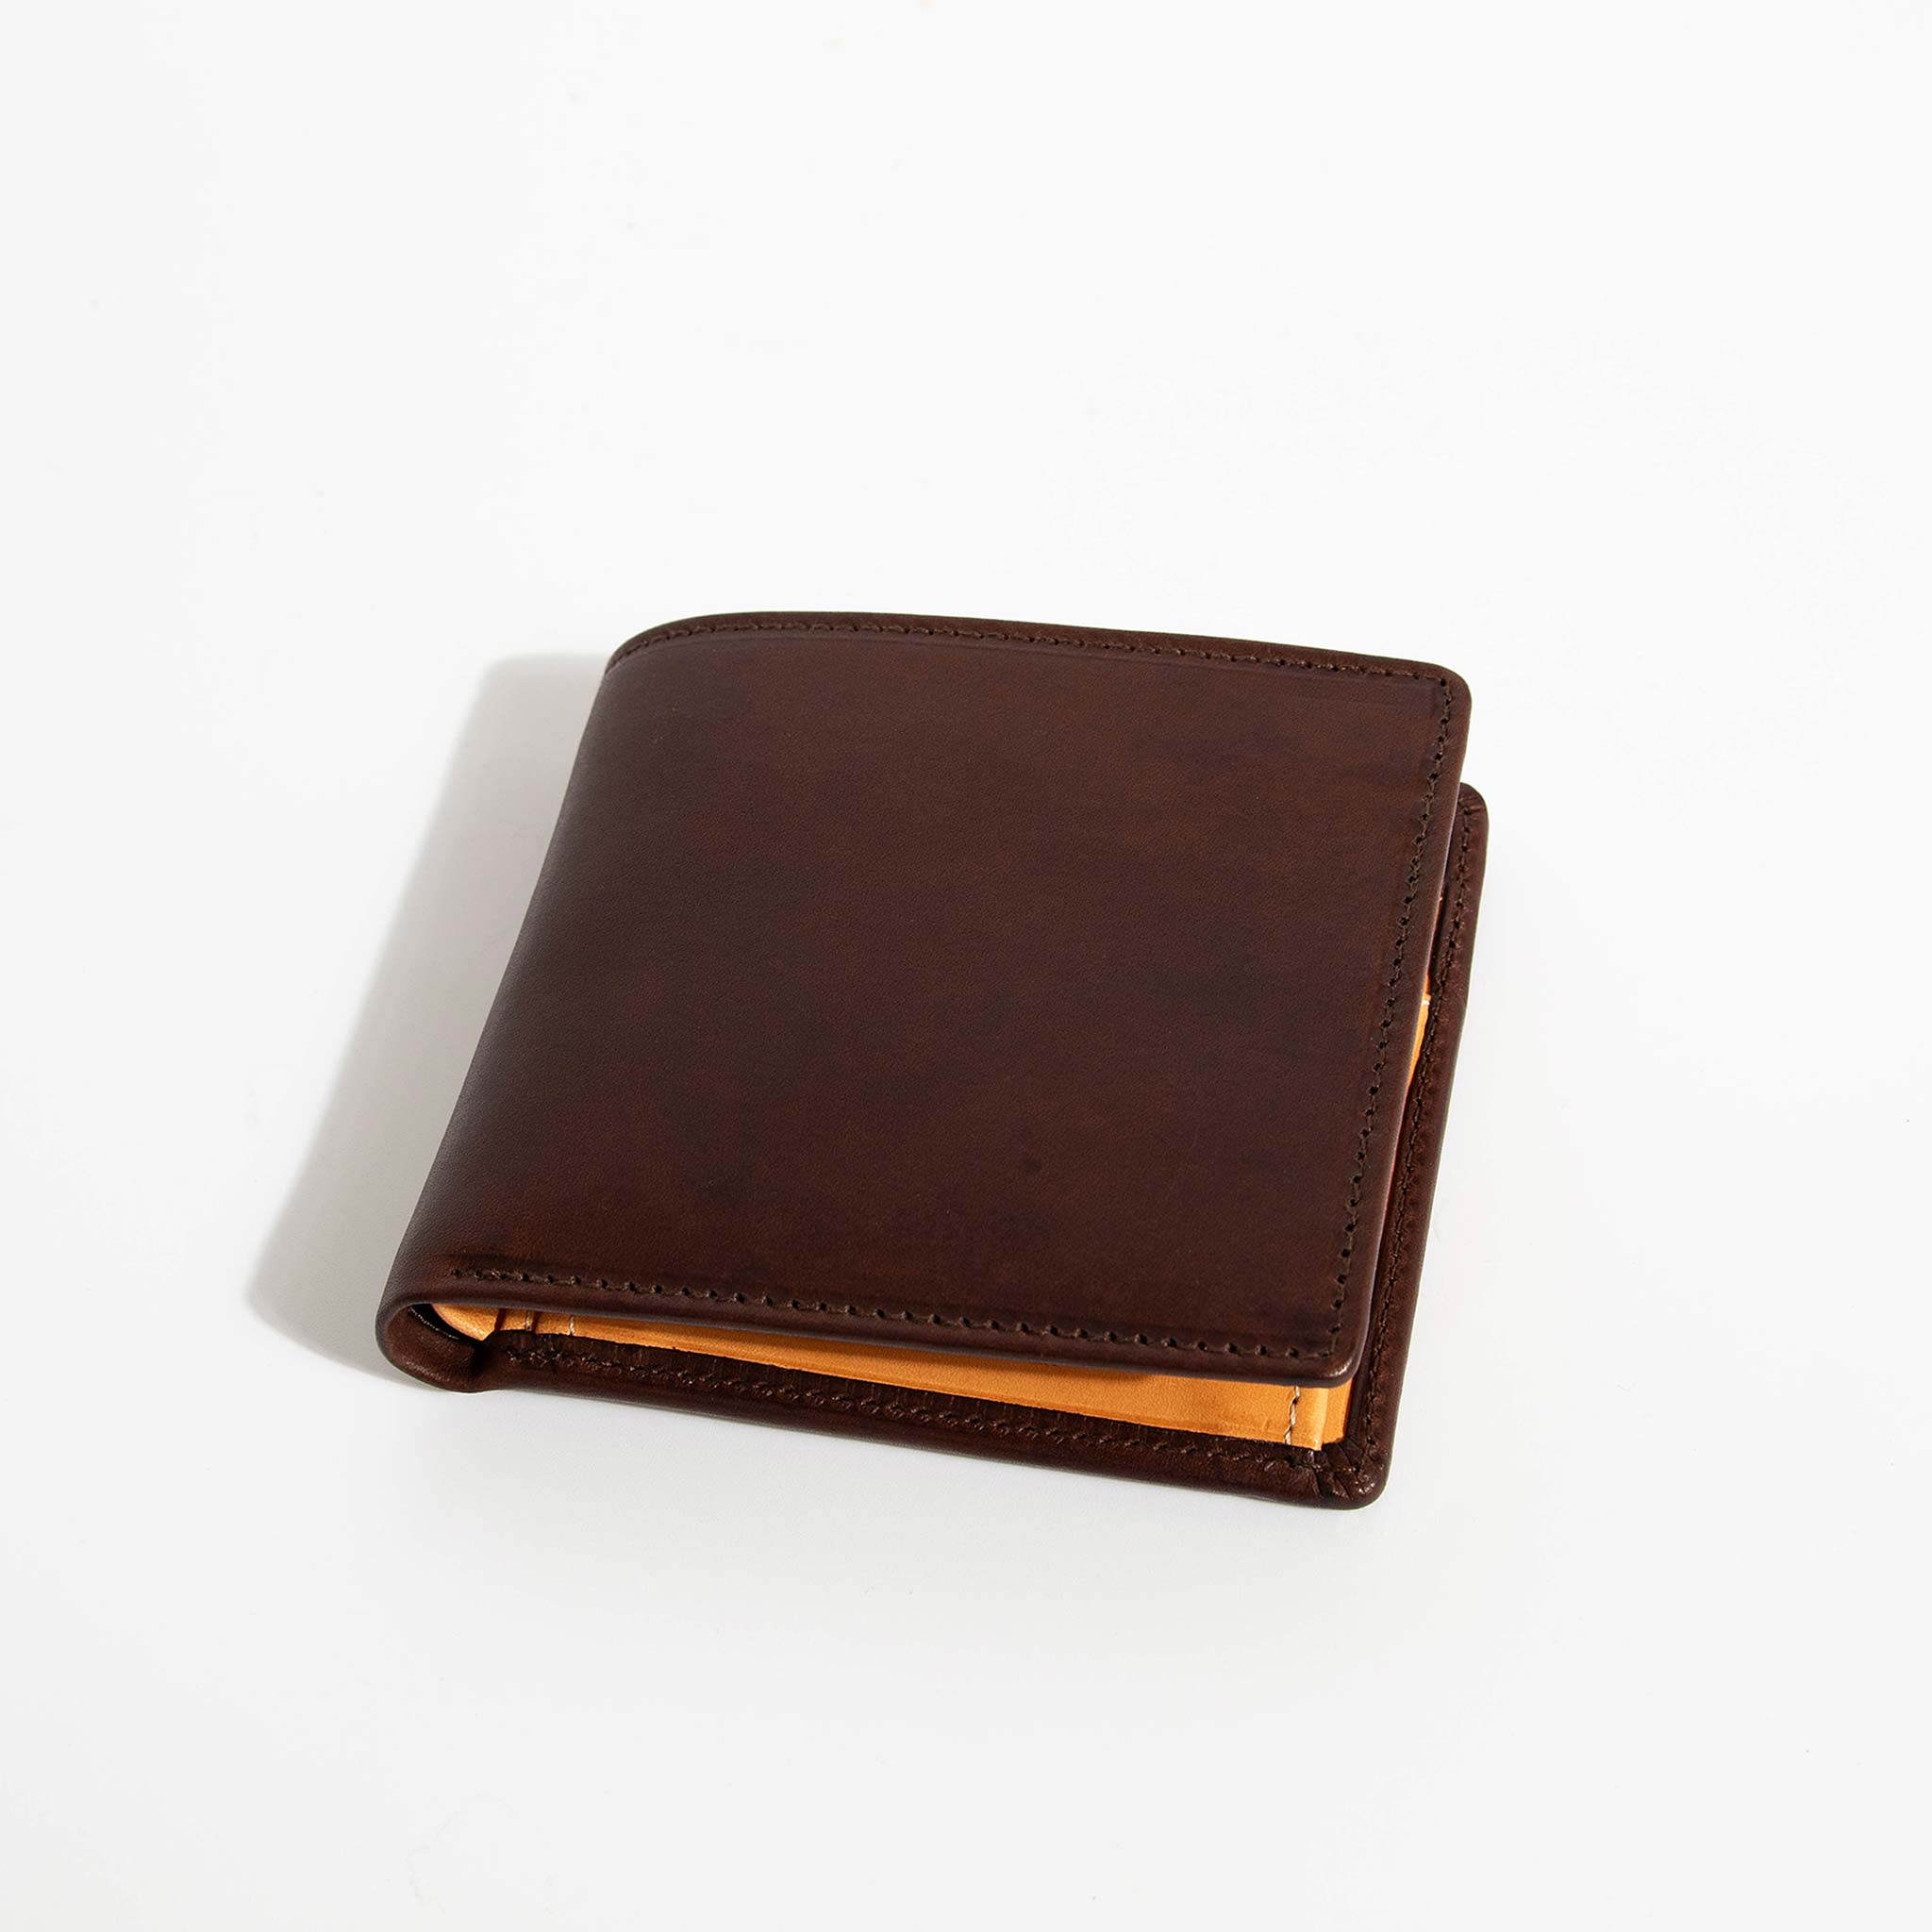 BEORMA THE CLARENCE COIN POCKET NOTE CASE TWO TONE S0008 BADALASSI